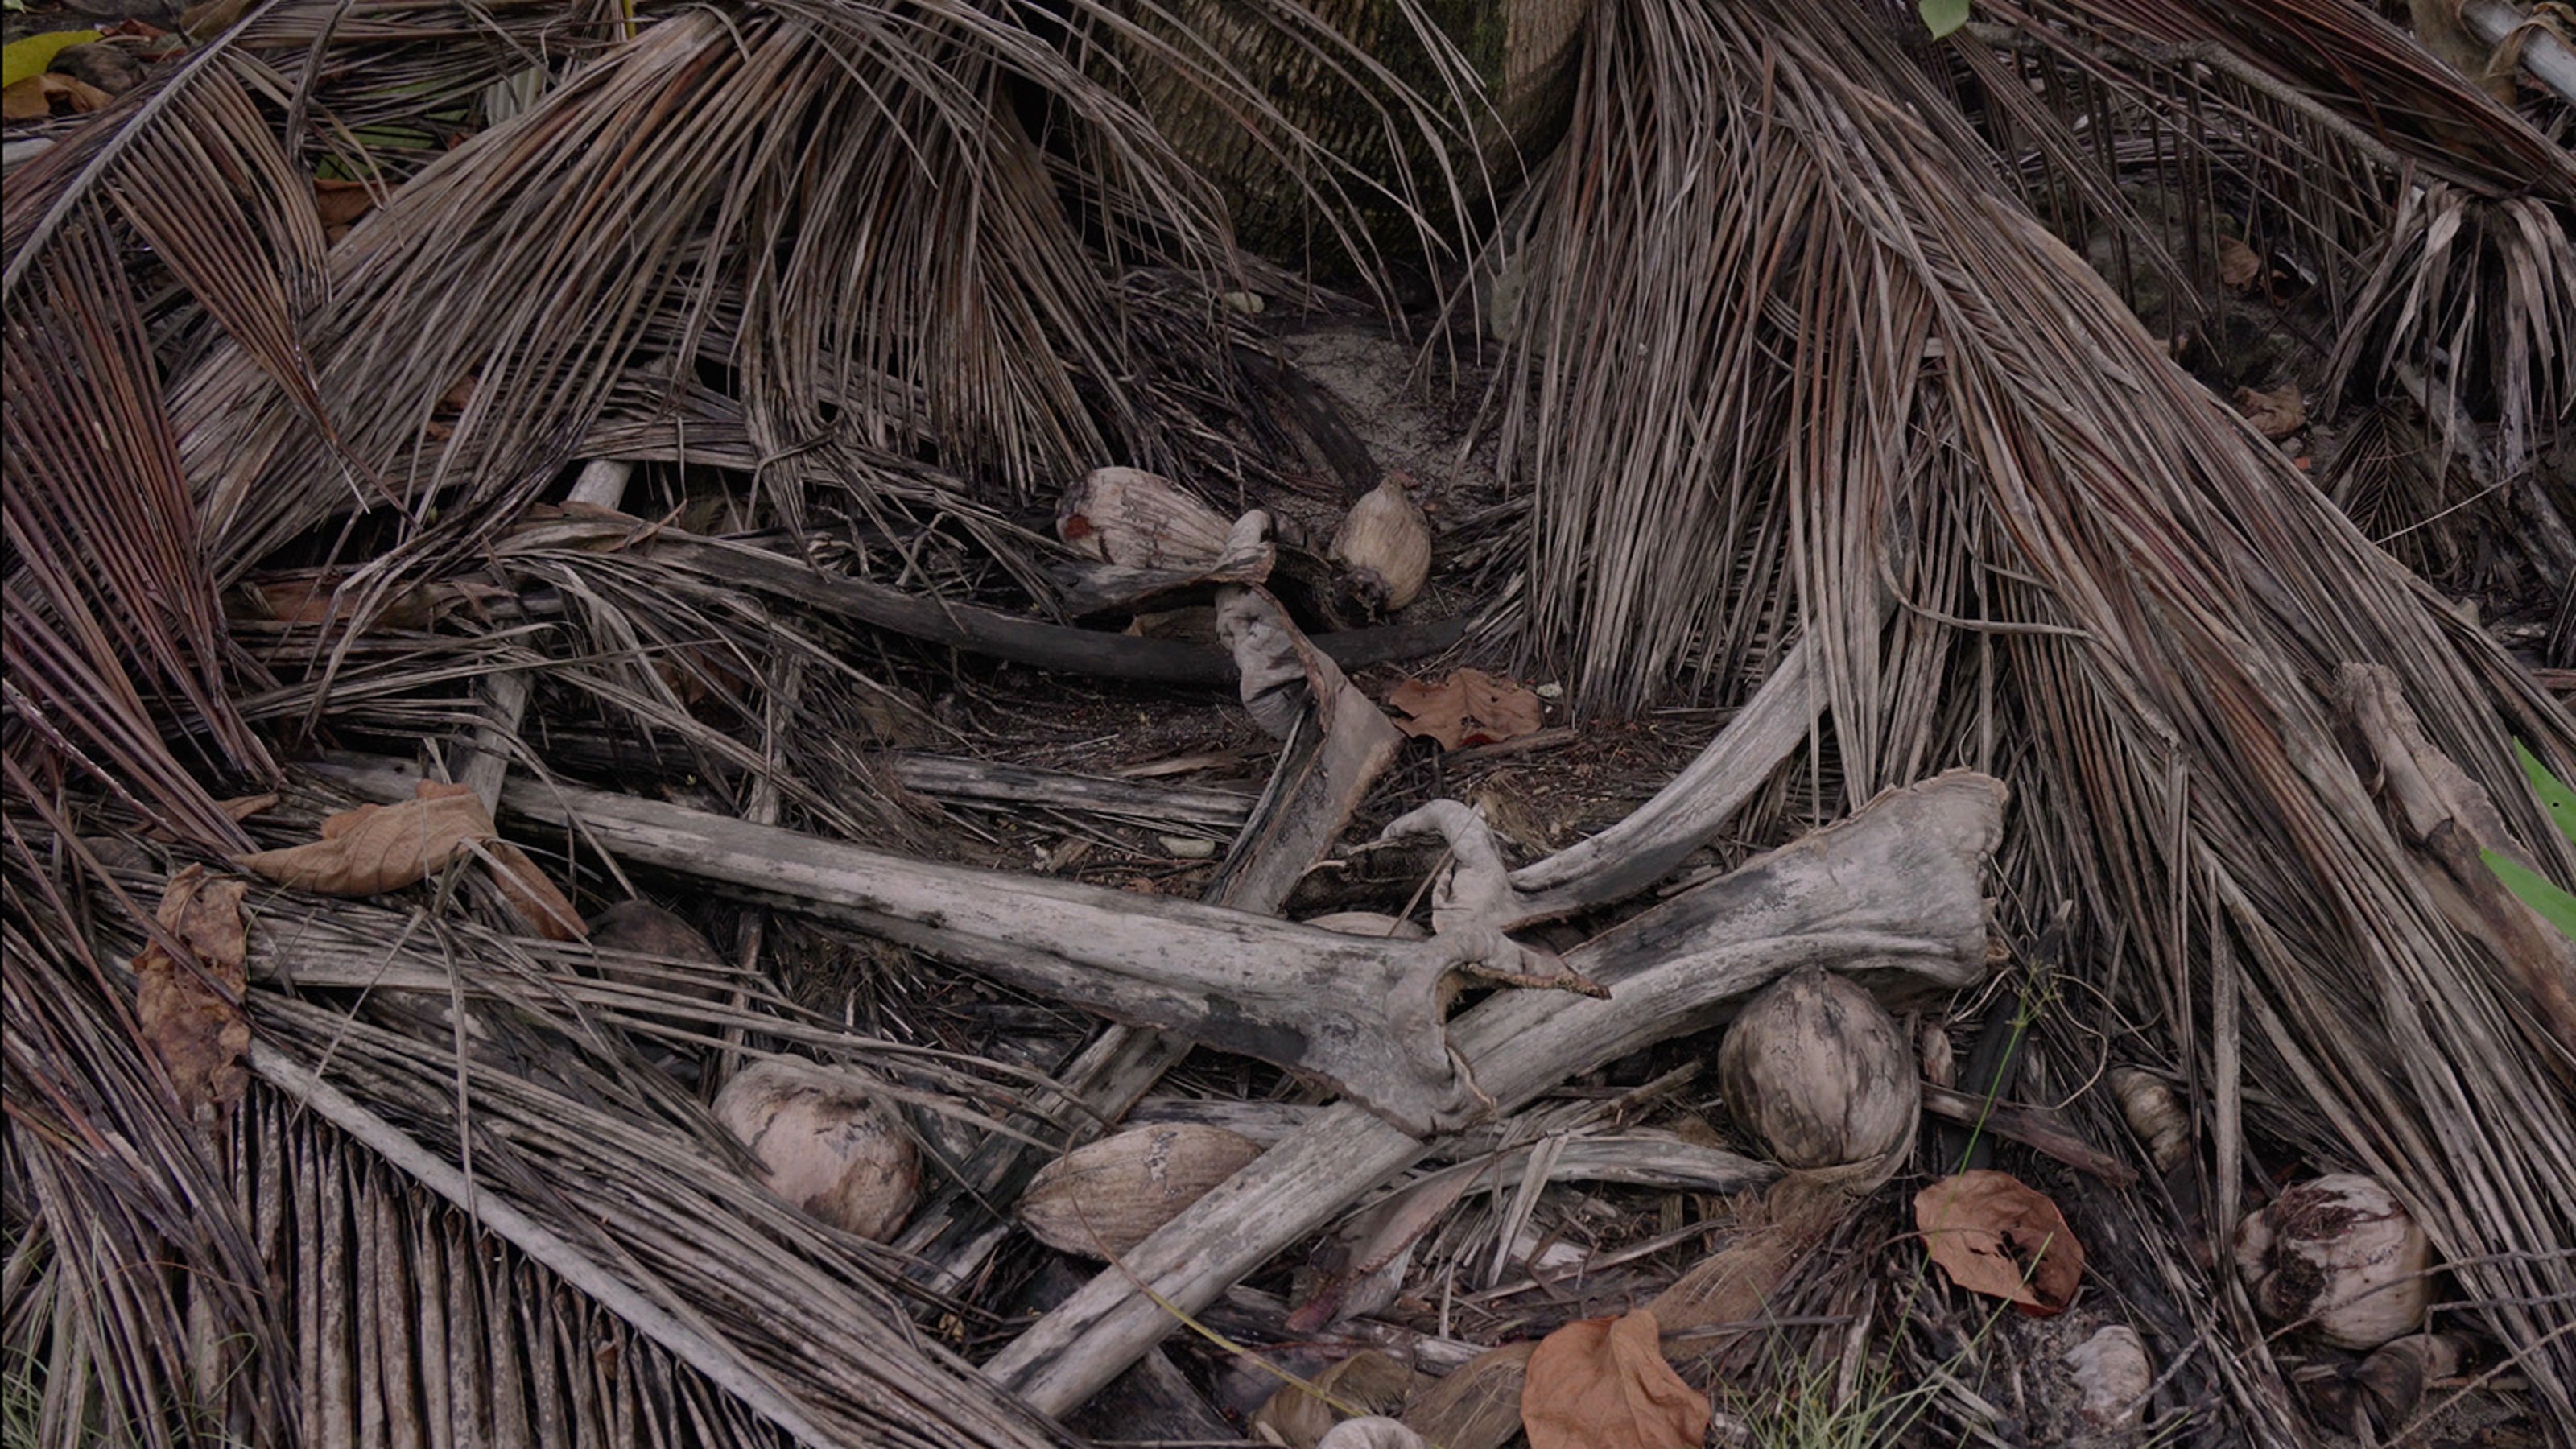 Dry palm leaves and bones